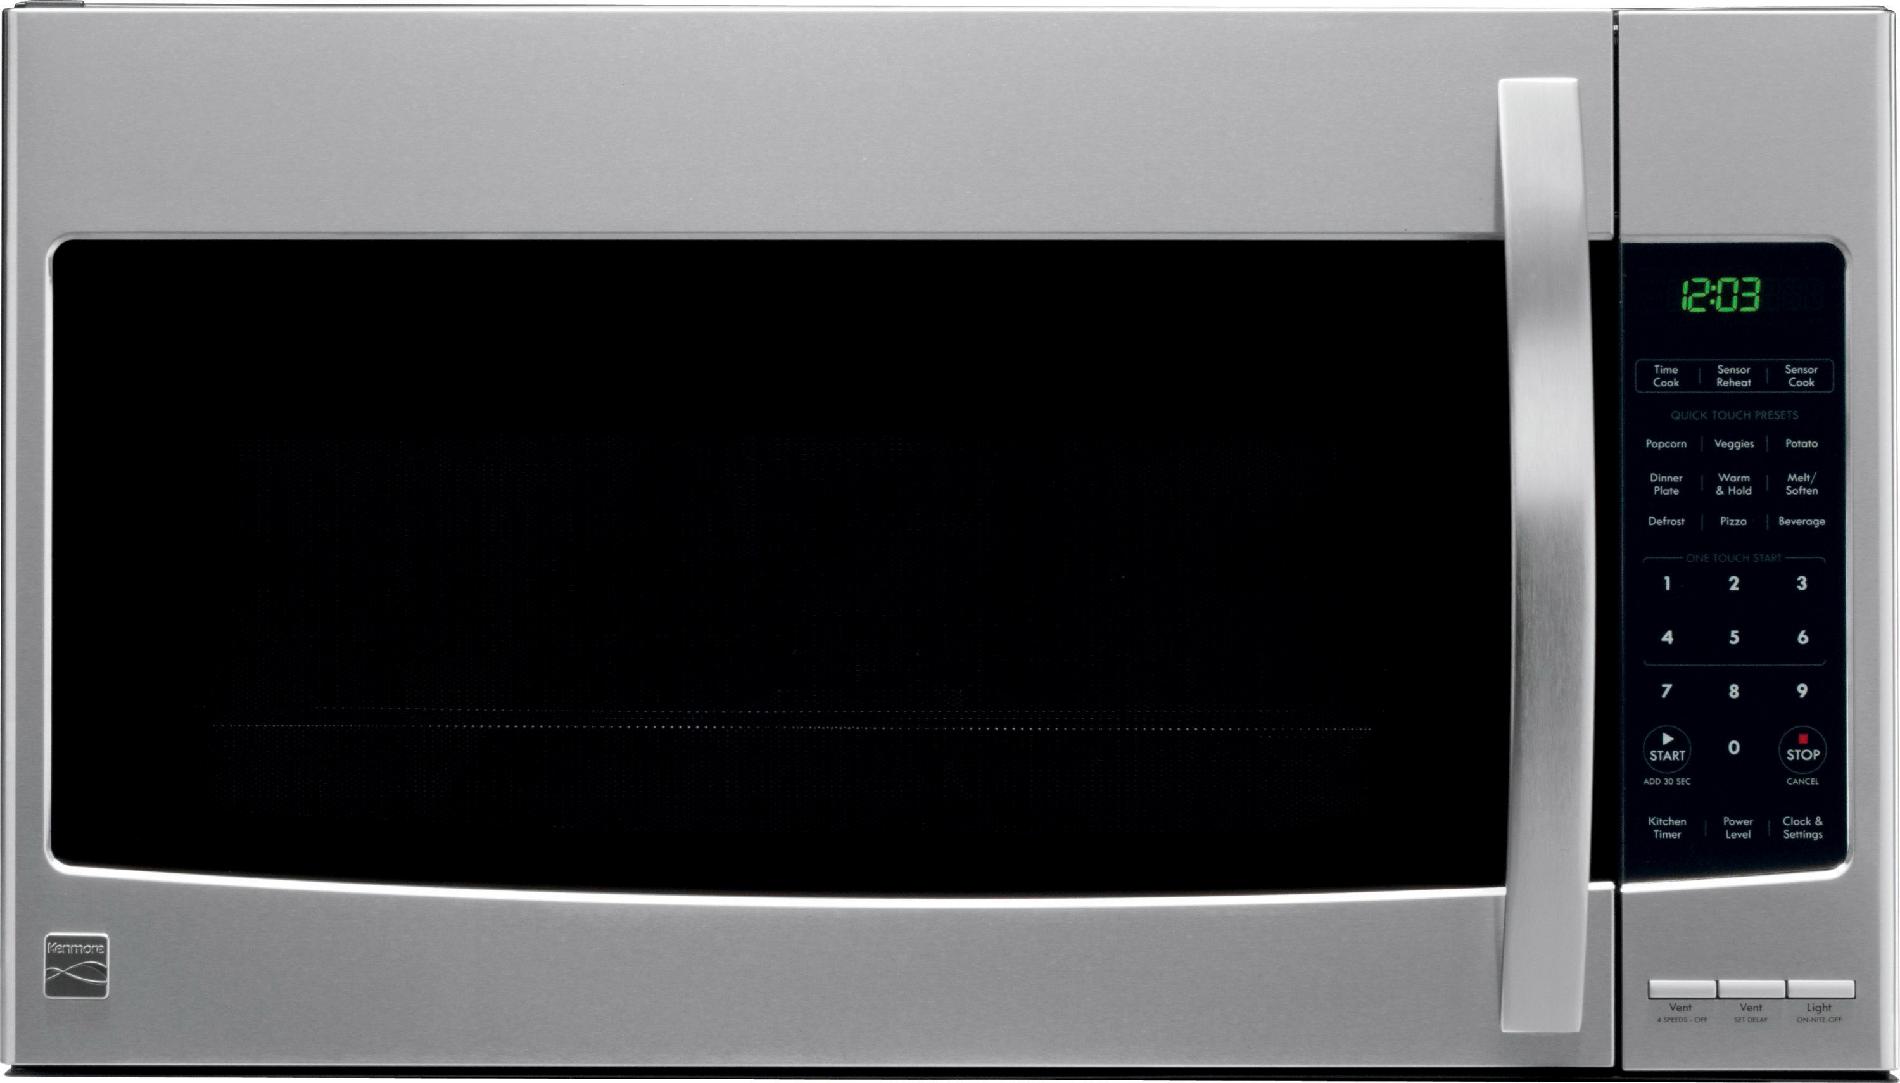 Kenmore 2.1 cu. ft. Over-the-Range Microwave - Stainless Steel